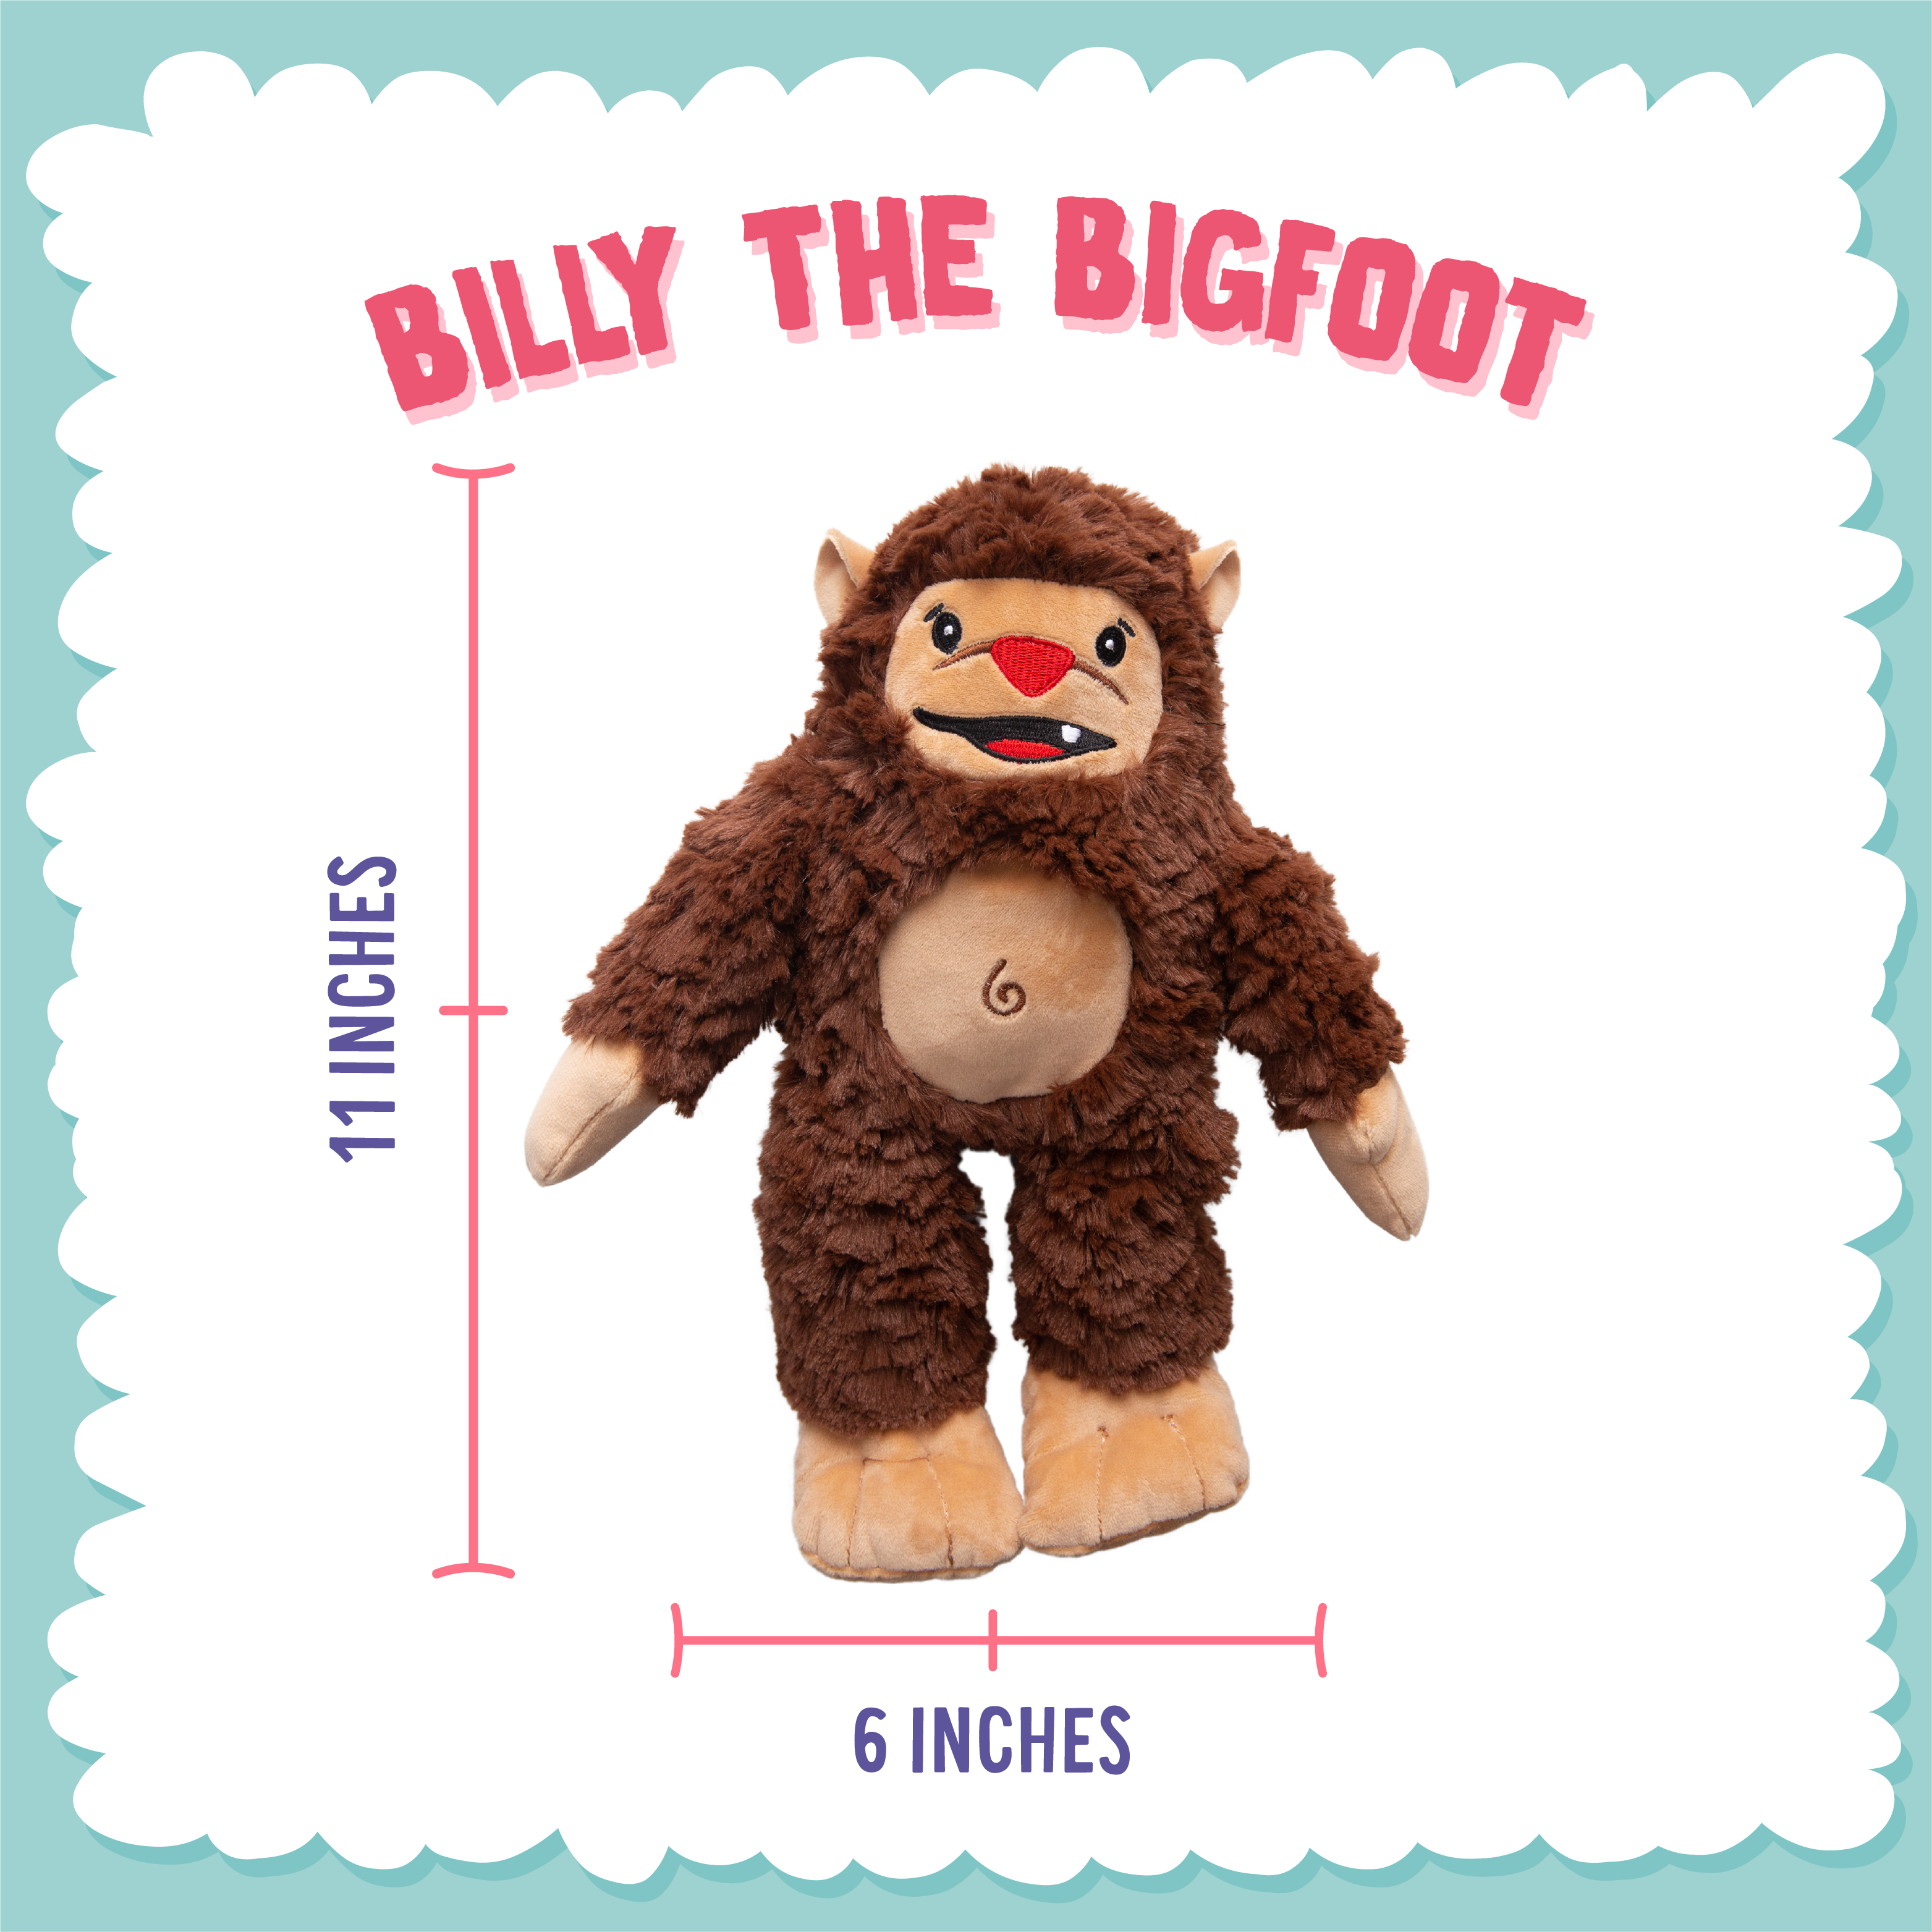 Billy the Big Foot